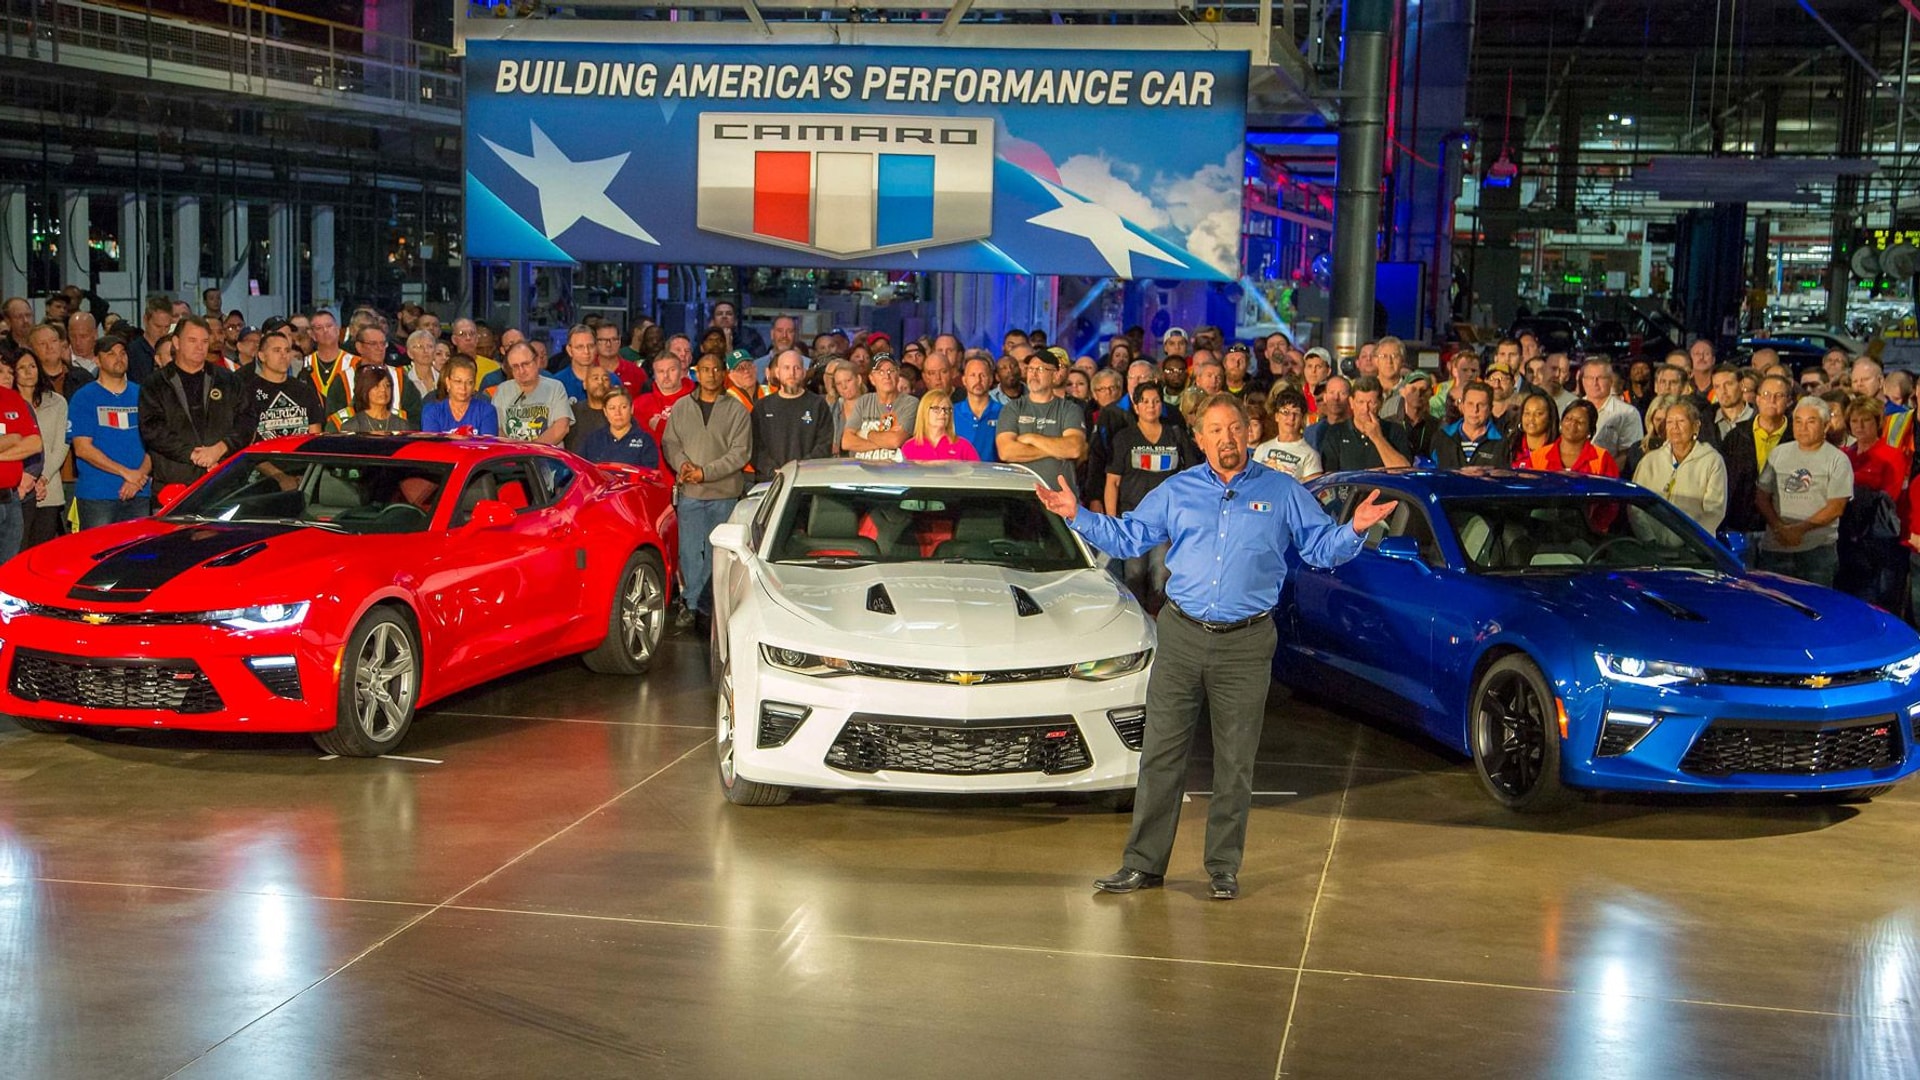 First batch of 2016 Chevrolet Camaros en route to dealers